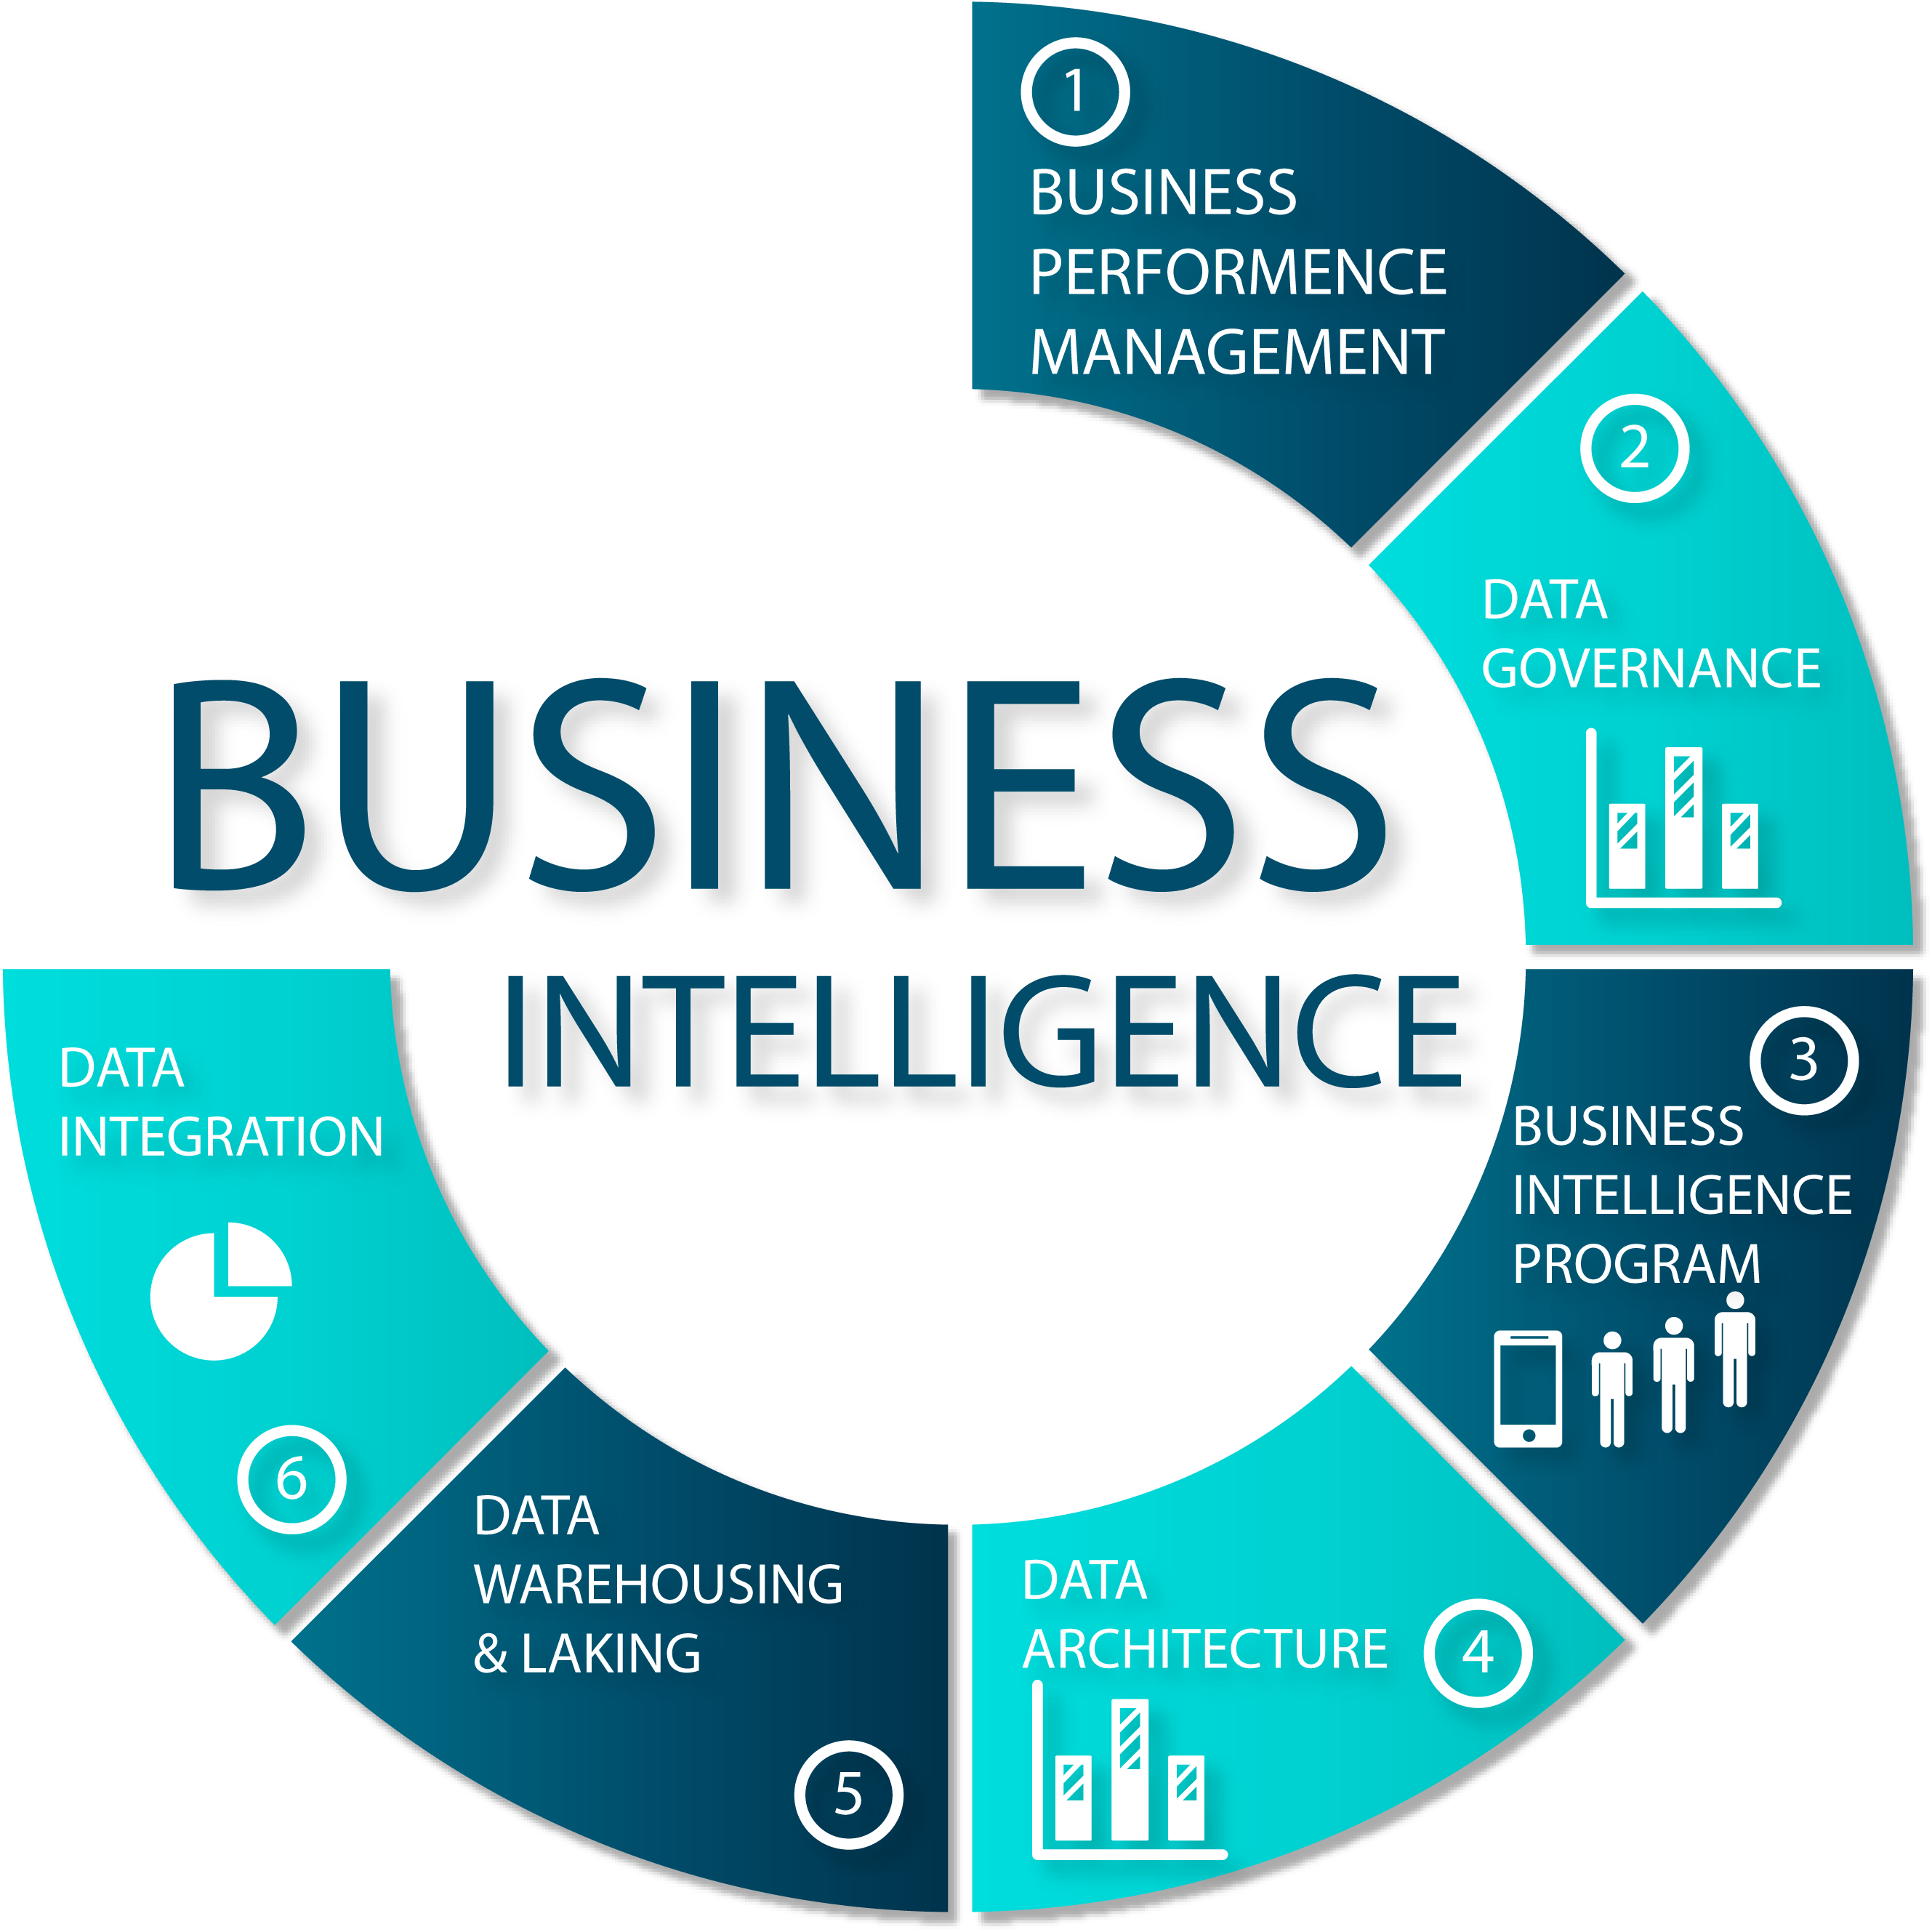 What challenges faced in implementing Business Intelligence in Saudi Arabia?